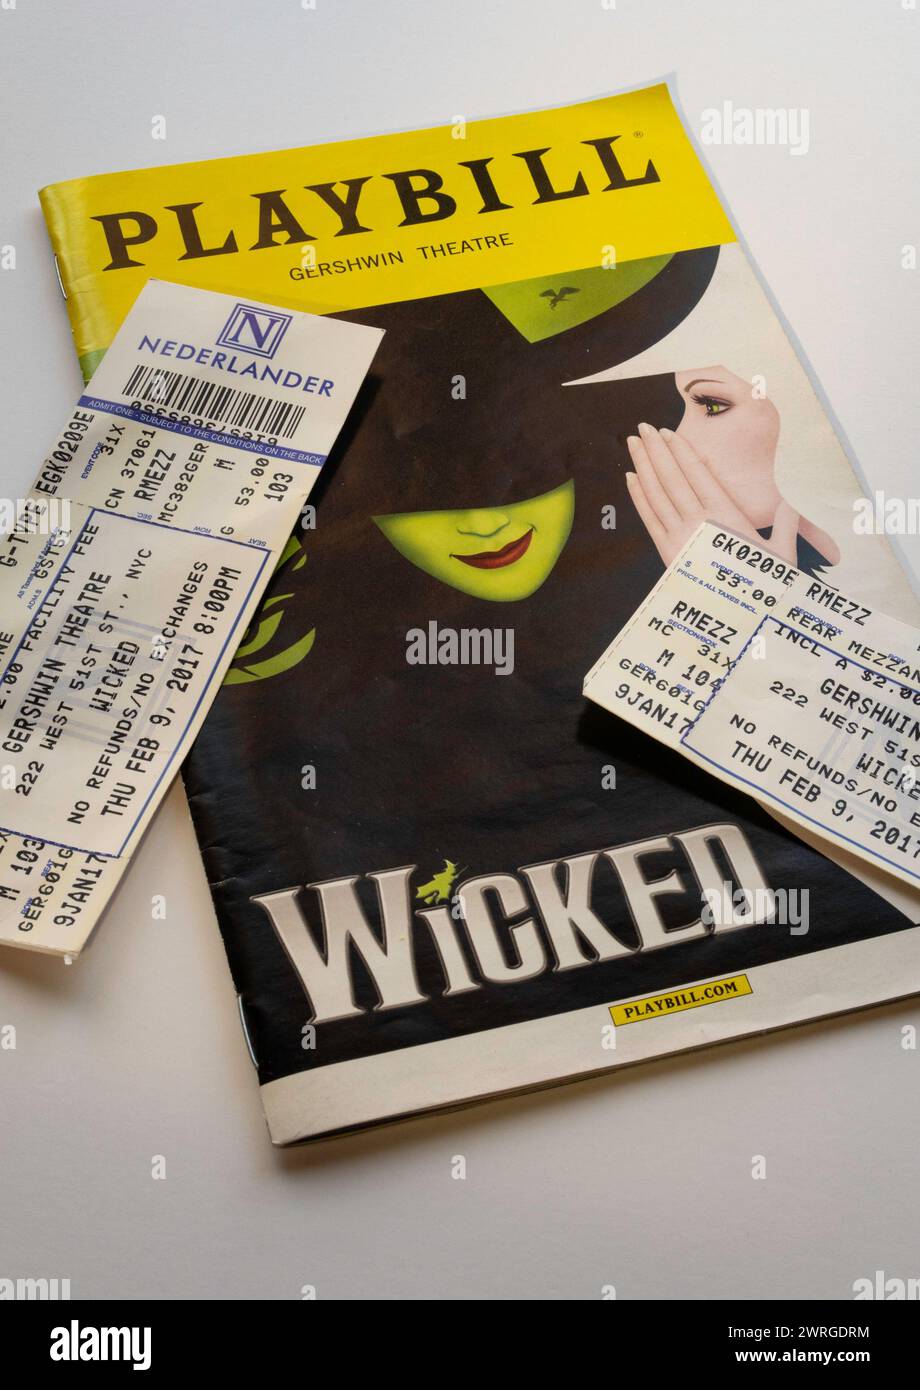 Gershwin Theatre Playbill and Tickets for the musical 'Wicked' Stock Photo